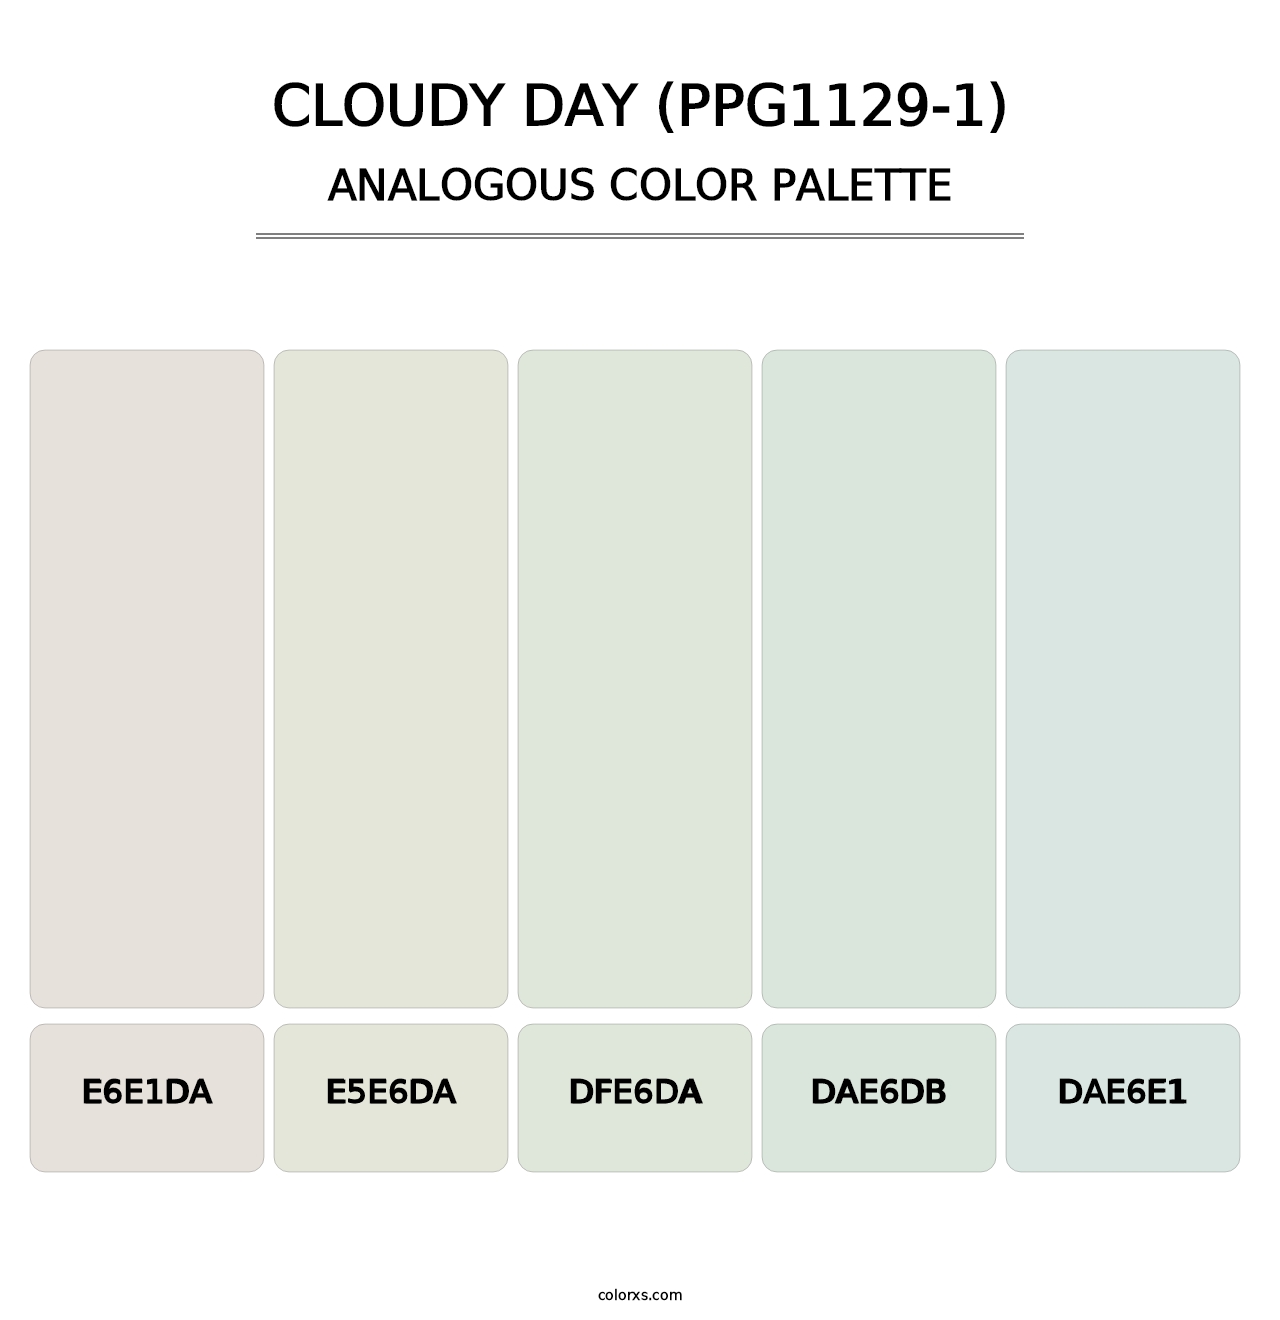 Cloudy Day (PPG1129-1) - Analogous Color Palette